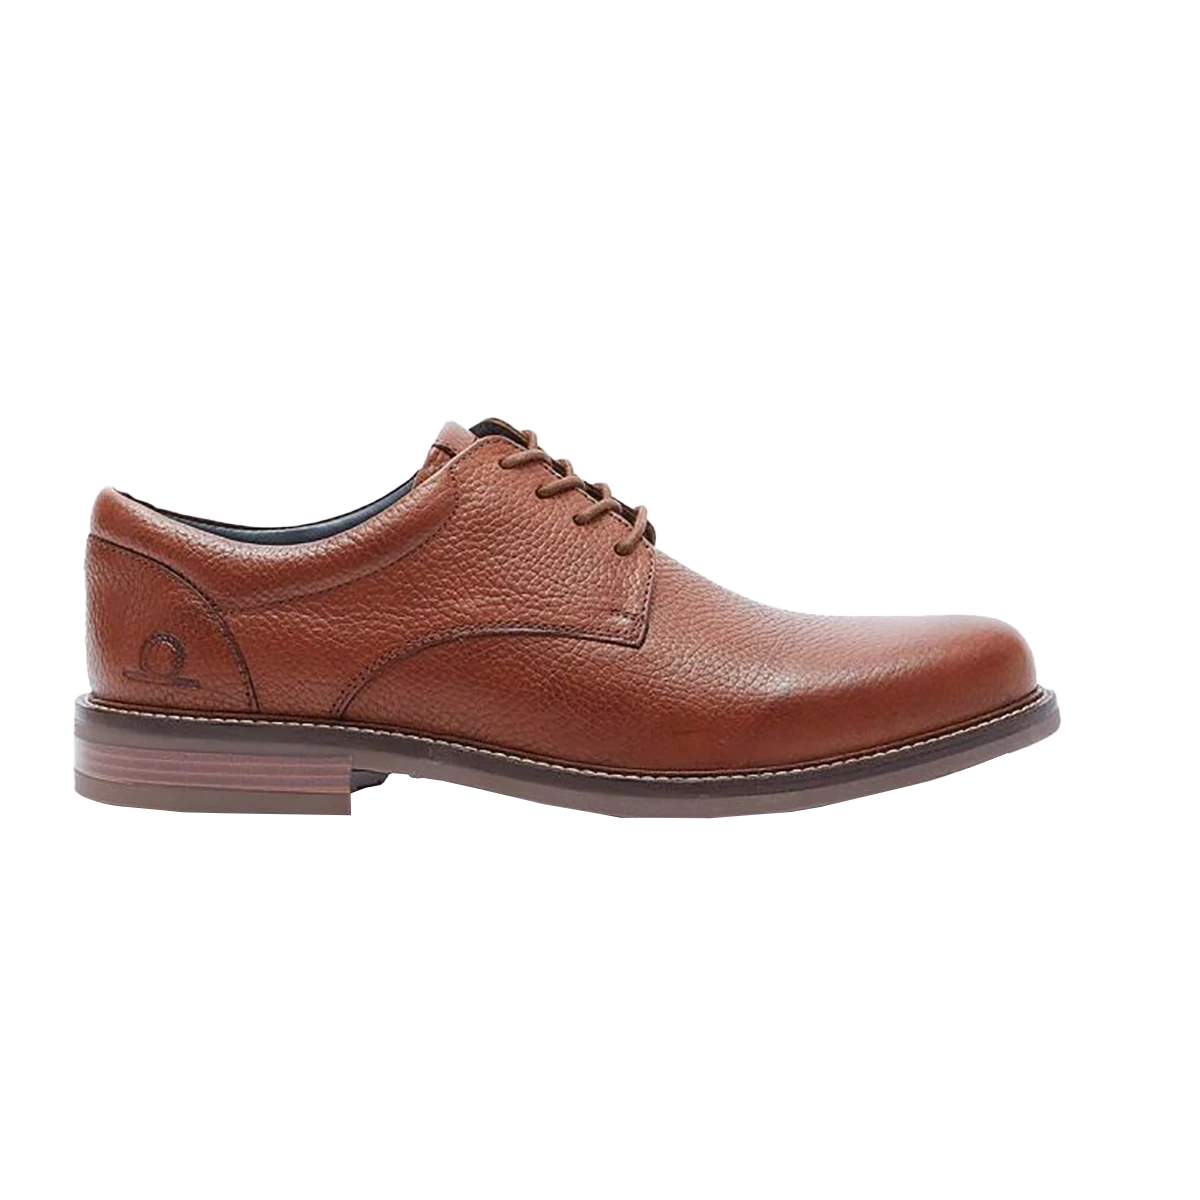 Chatham Wentworth Shoes for Men